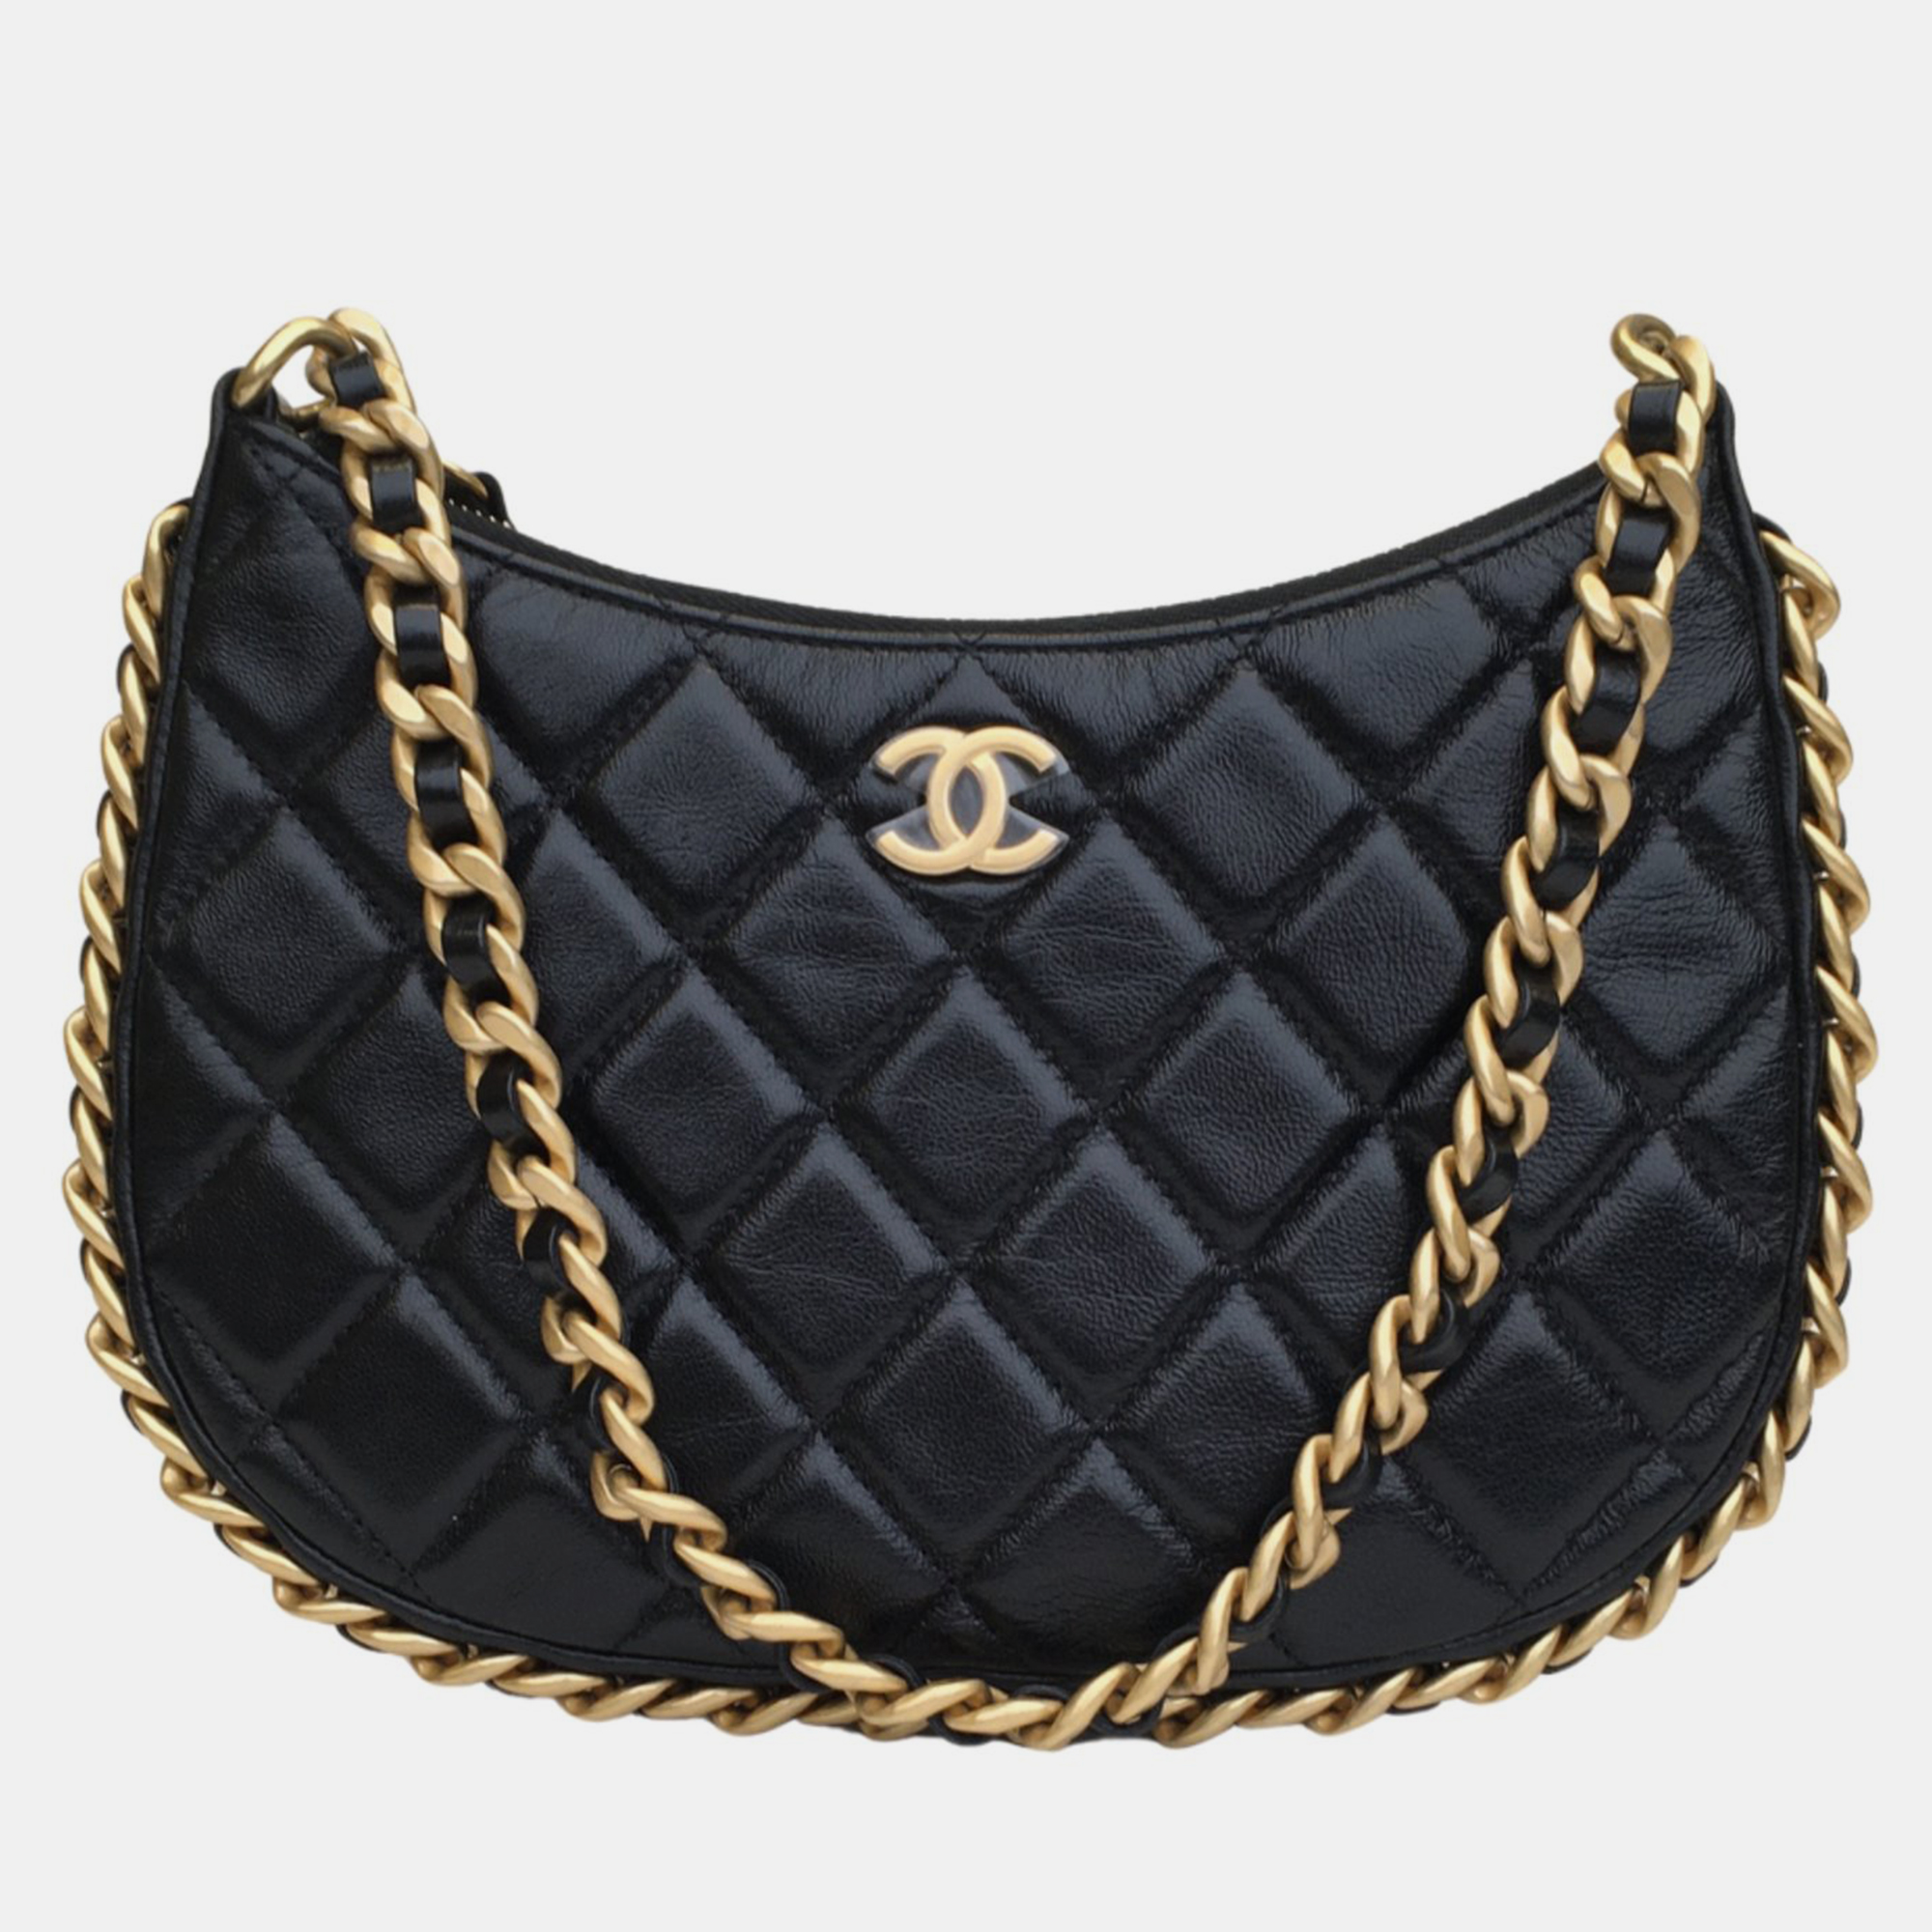 Chanel black quilted lambskin hobo bag